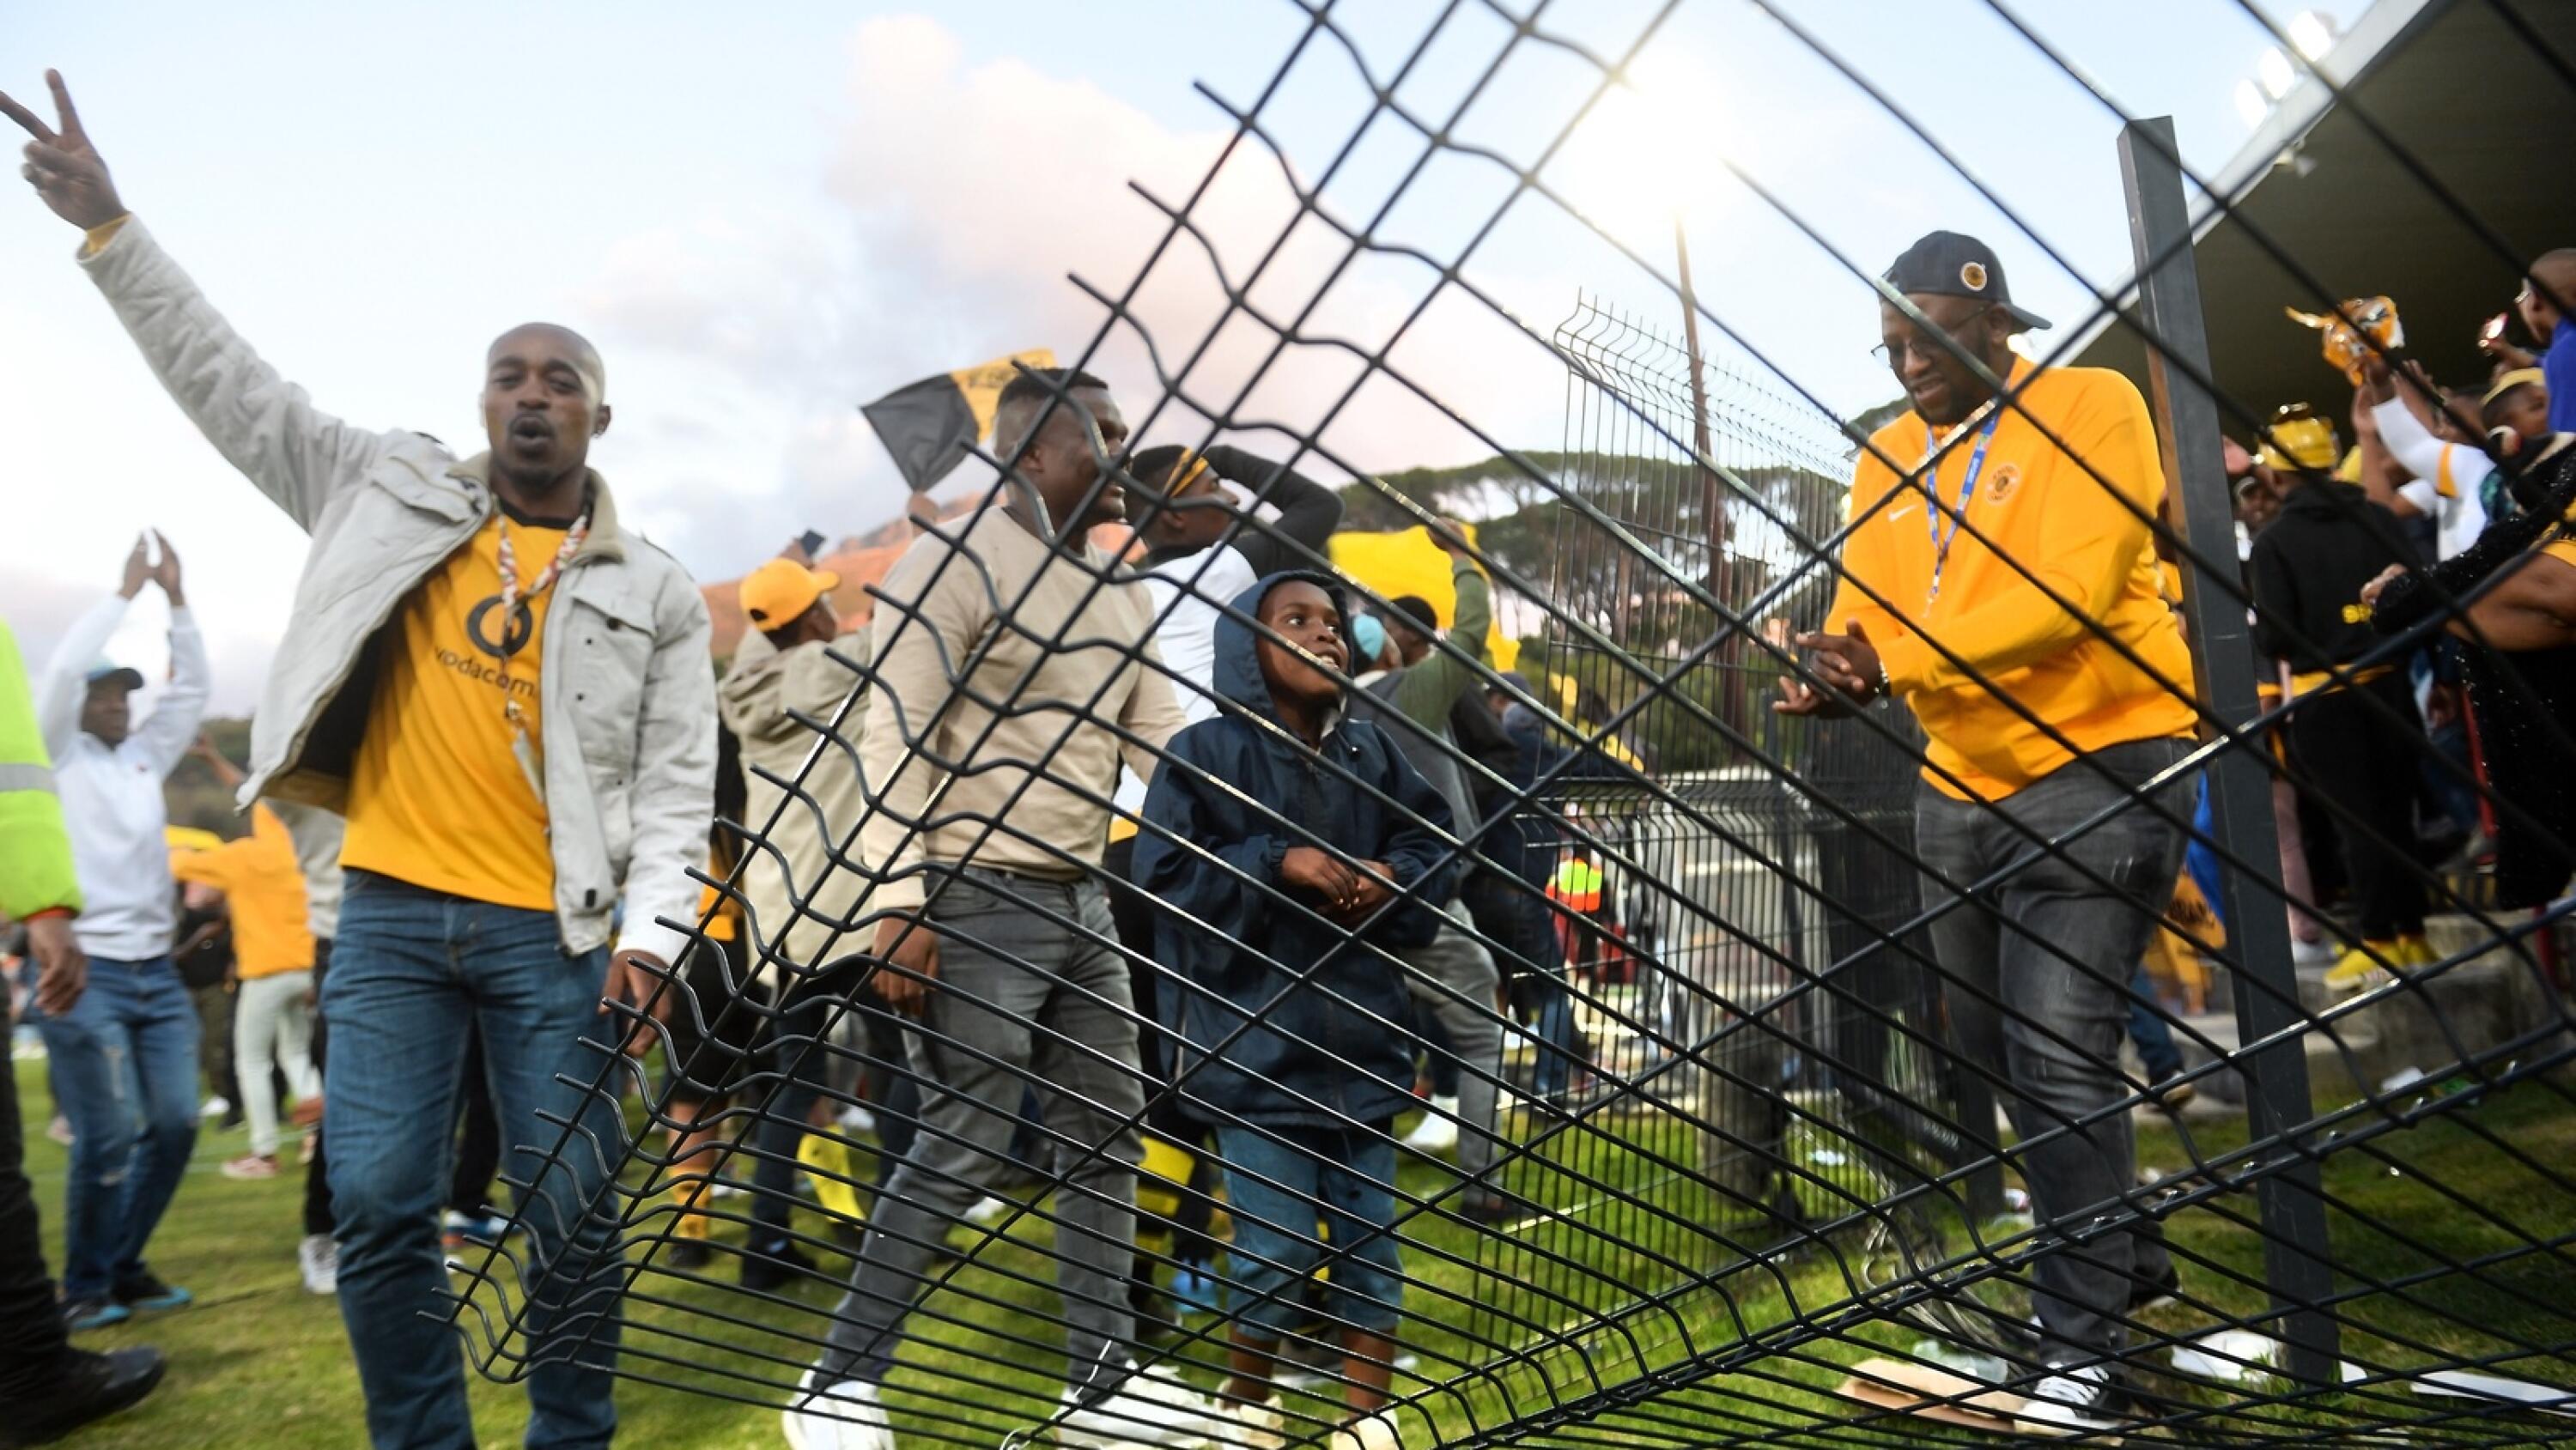 Kaizer Chiefs supporters invading the field